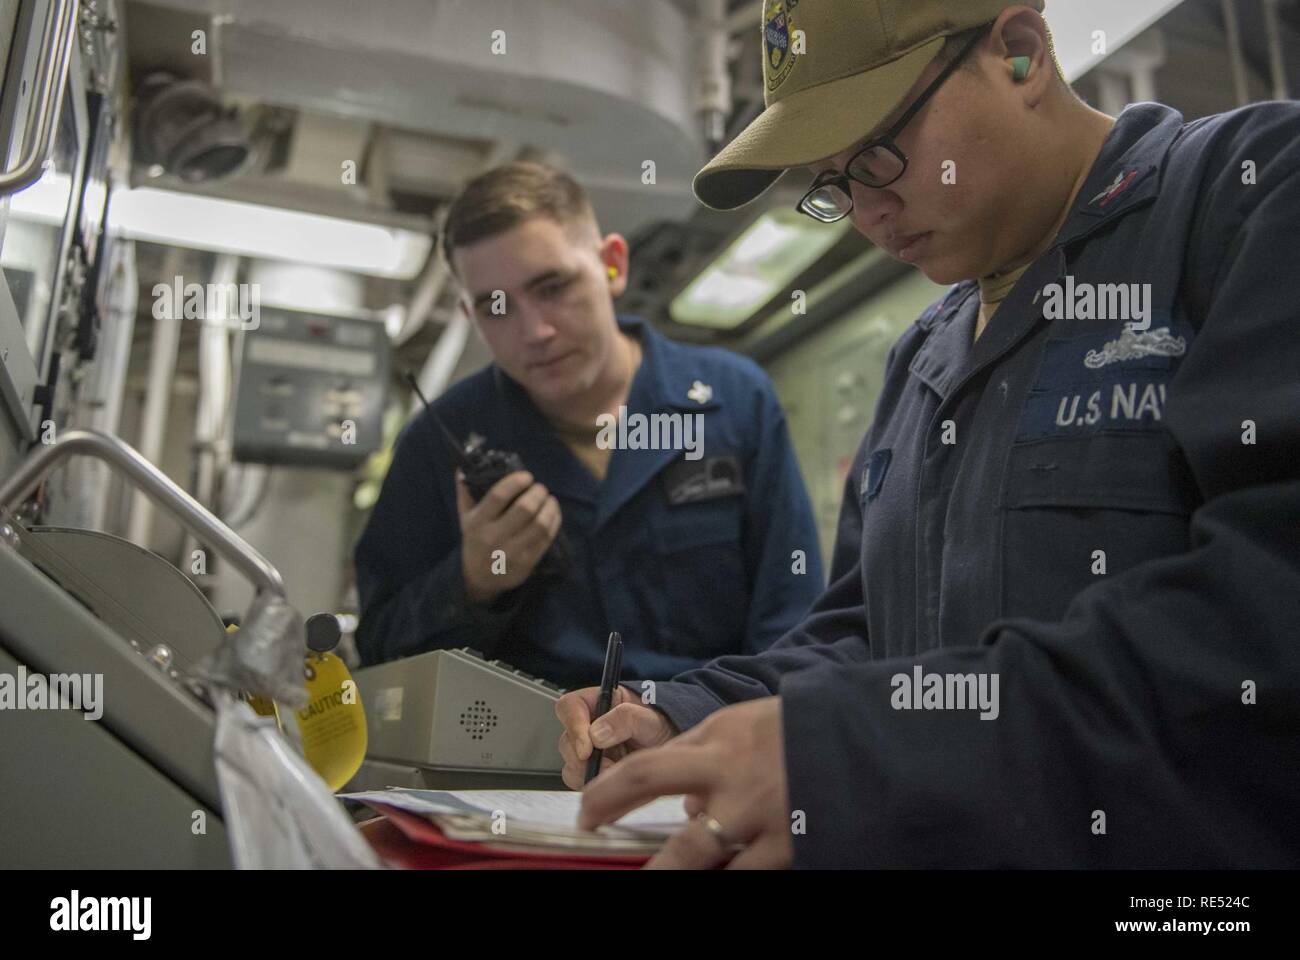 EAST CHINA SEA (Jan. 1, 2018) Gas Turbine Systems Technician (Electrical) 1st Class Cleo Vidamo, from Lisle, Ill., right, and Gas Turbine Systems Technician (Mechanical) 3rd Class Christopher Garza, from Arlington, Texas, verify a gas turbine system’s parameters aboard the Arleigh Burke-class guided-missile destroyer USS McCampbell (DDG 85). McCampbell is forward-deployed to the U.S. 7th Fleet area of operations in support of security and stability in the Indo-Pacific region. Stock Photo